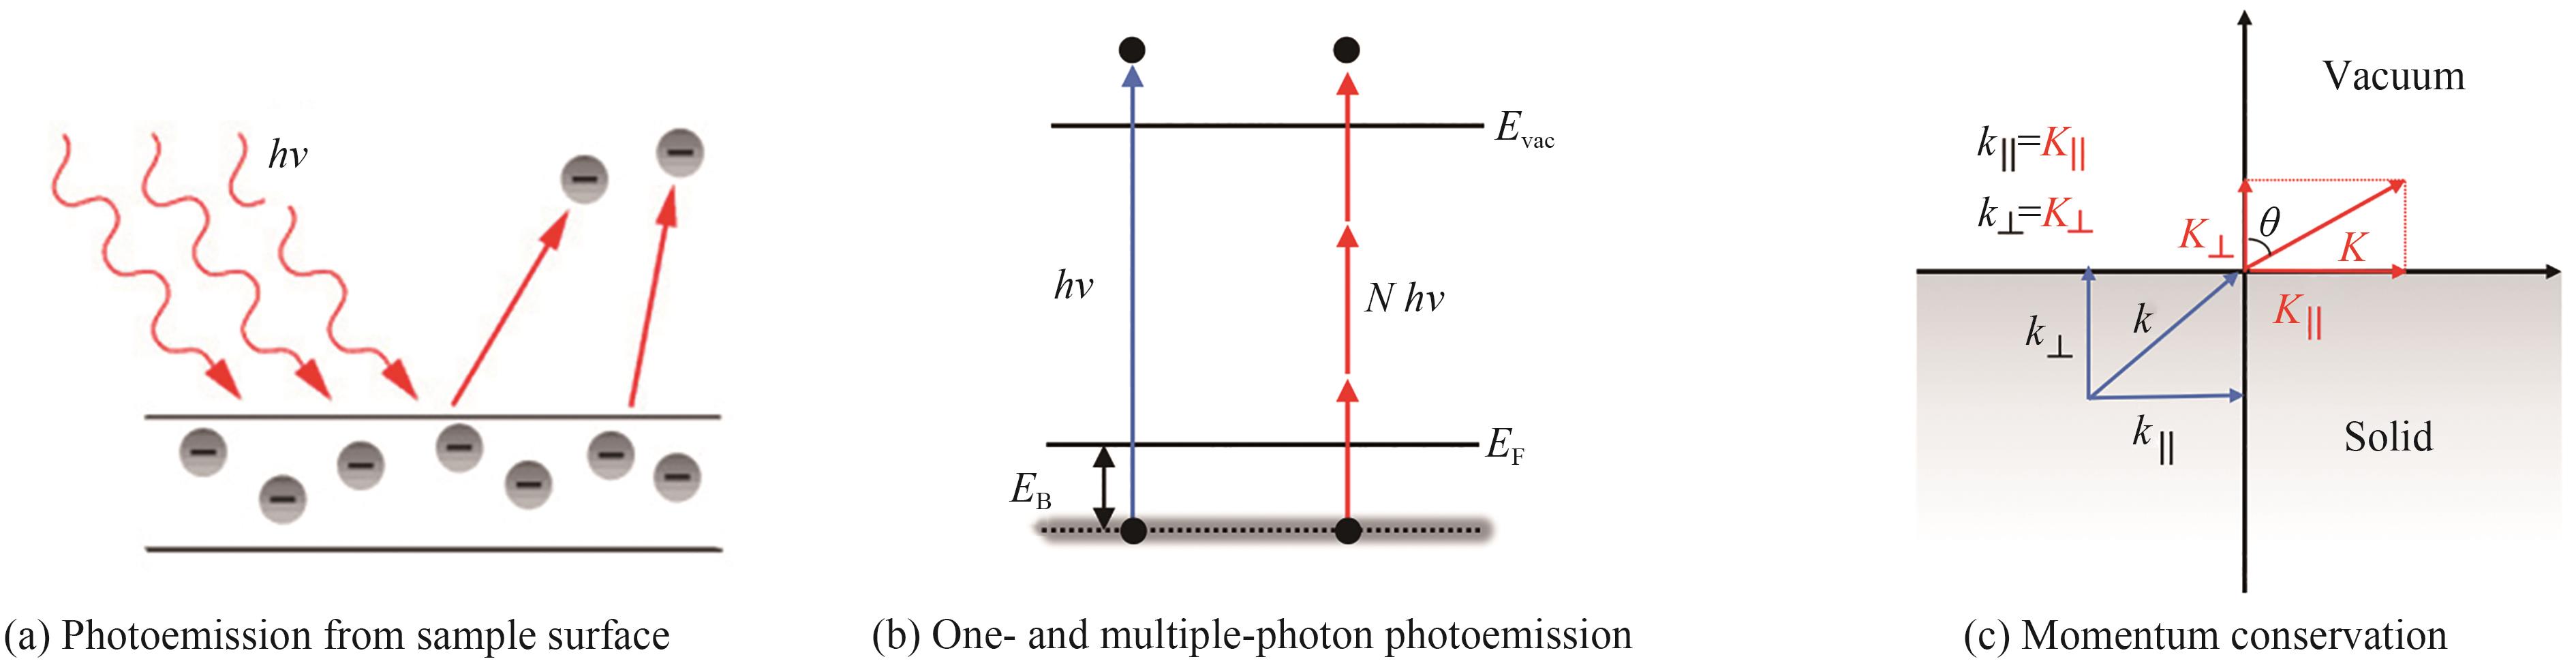 Schematic of photoemission process